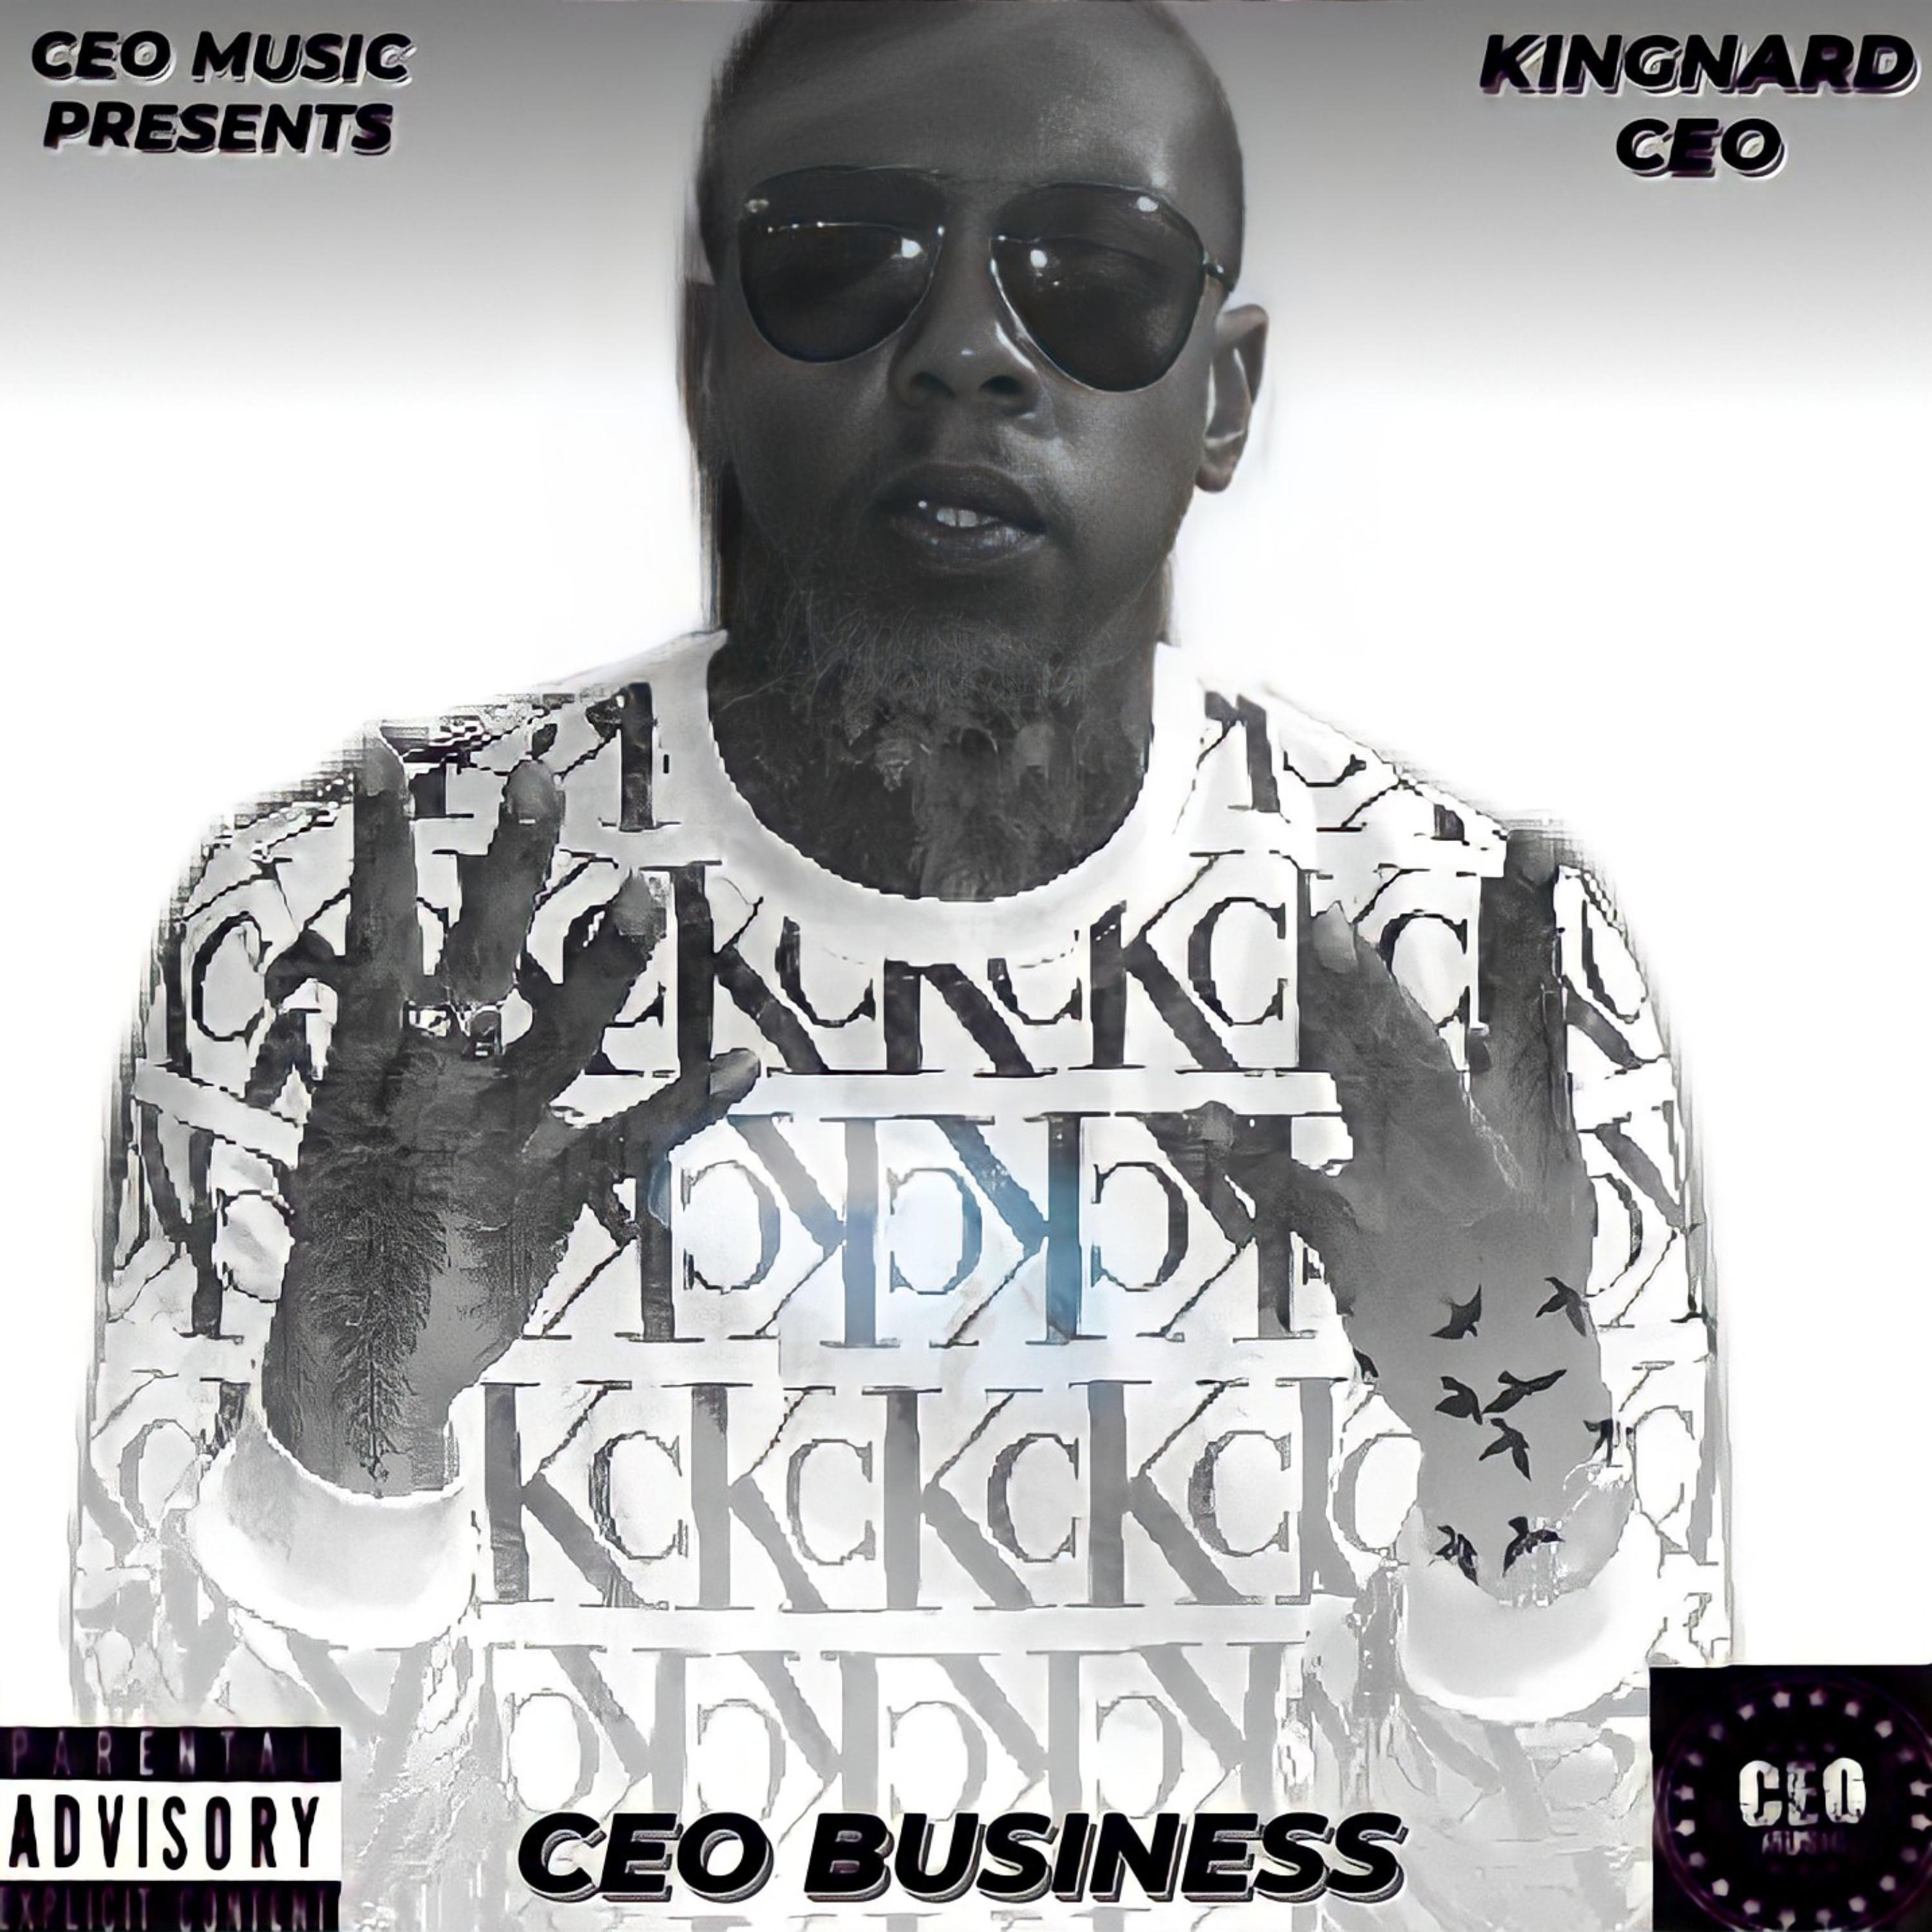 King Nard CEO - DON'T GET A VOTE